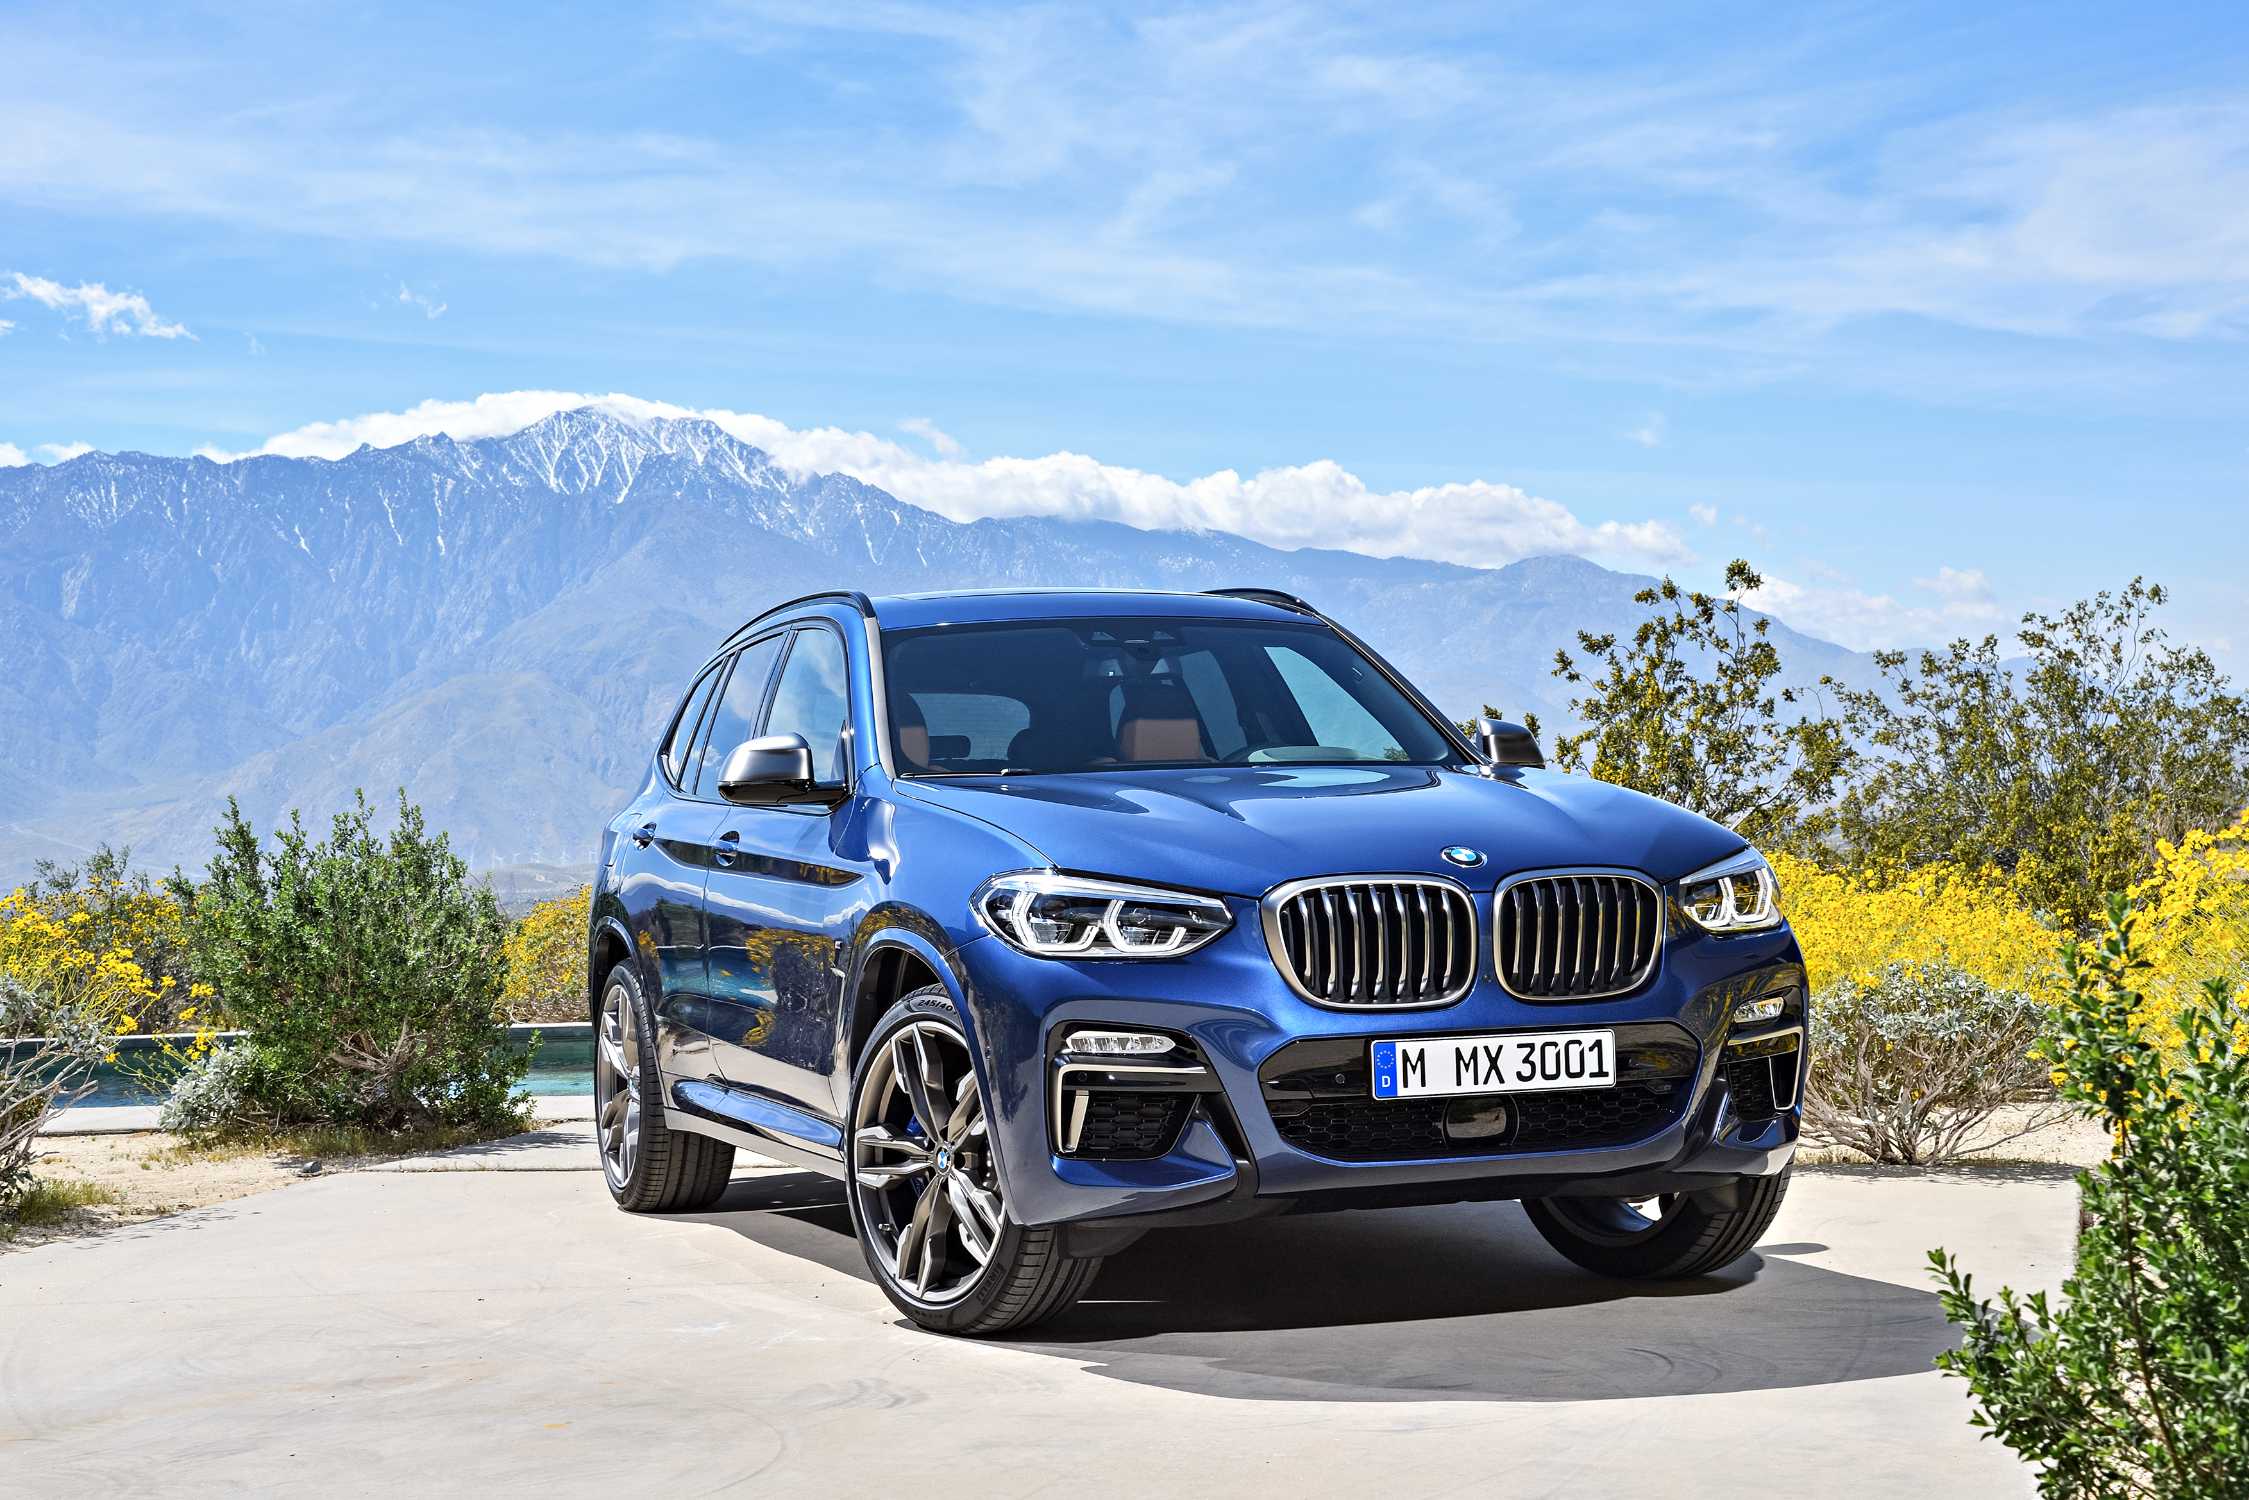 The new BMW X3 (09/2017).